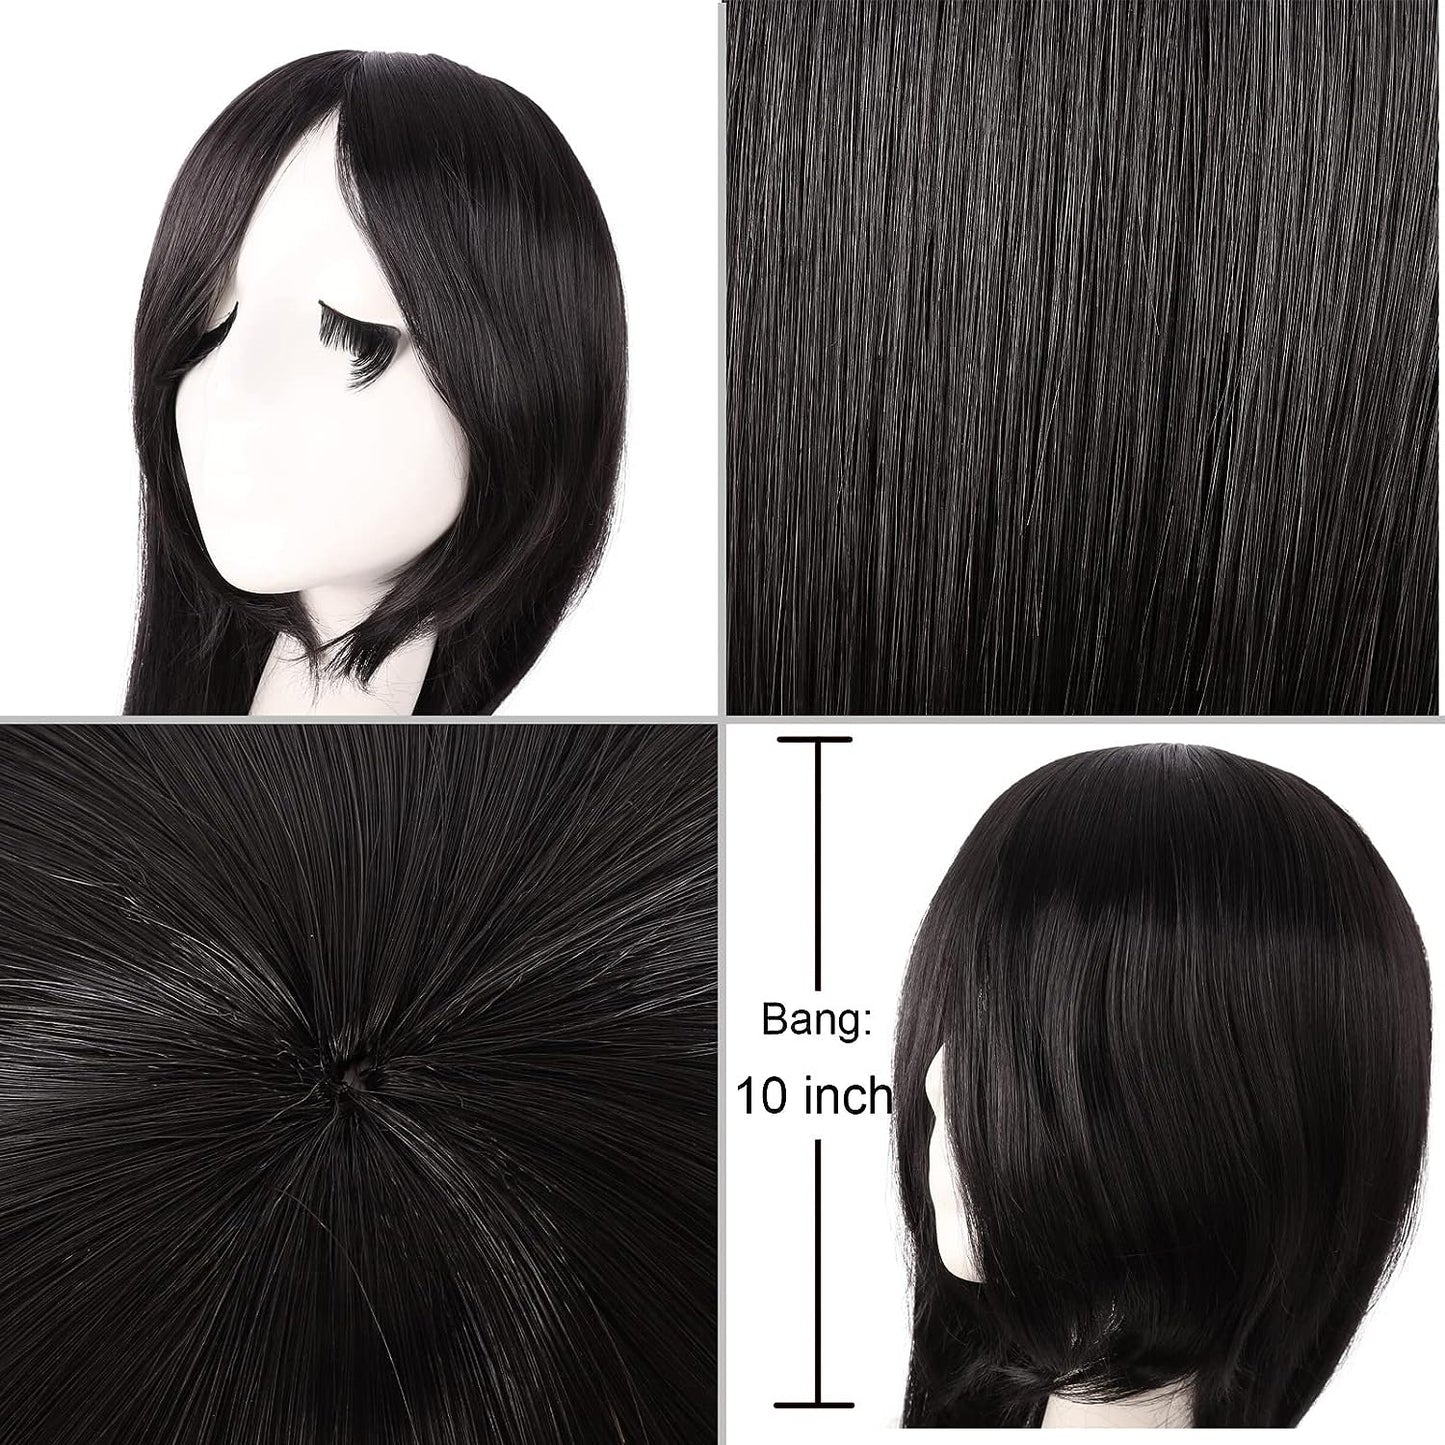 Anime Wig 40 Inch COSTUME Hair - 100cm Slant Bangs, Super Long Black Straight Cosplay Hair, Heat Resistant, Adjustable Synthetic High Quality